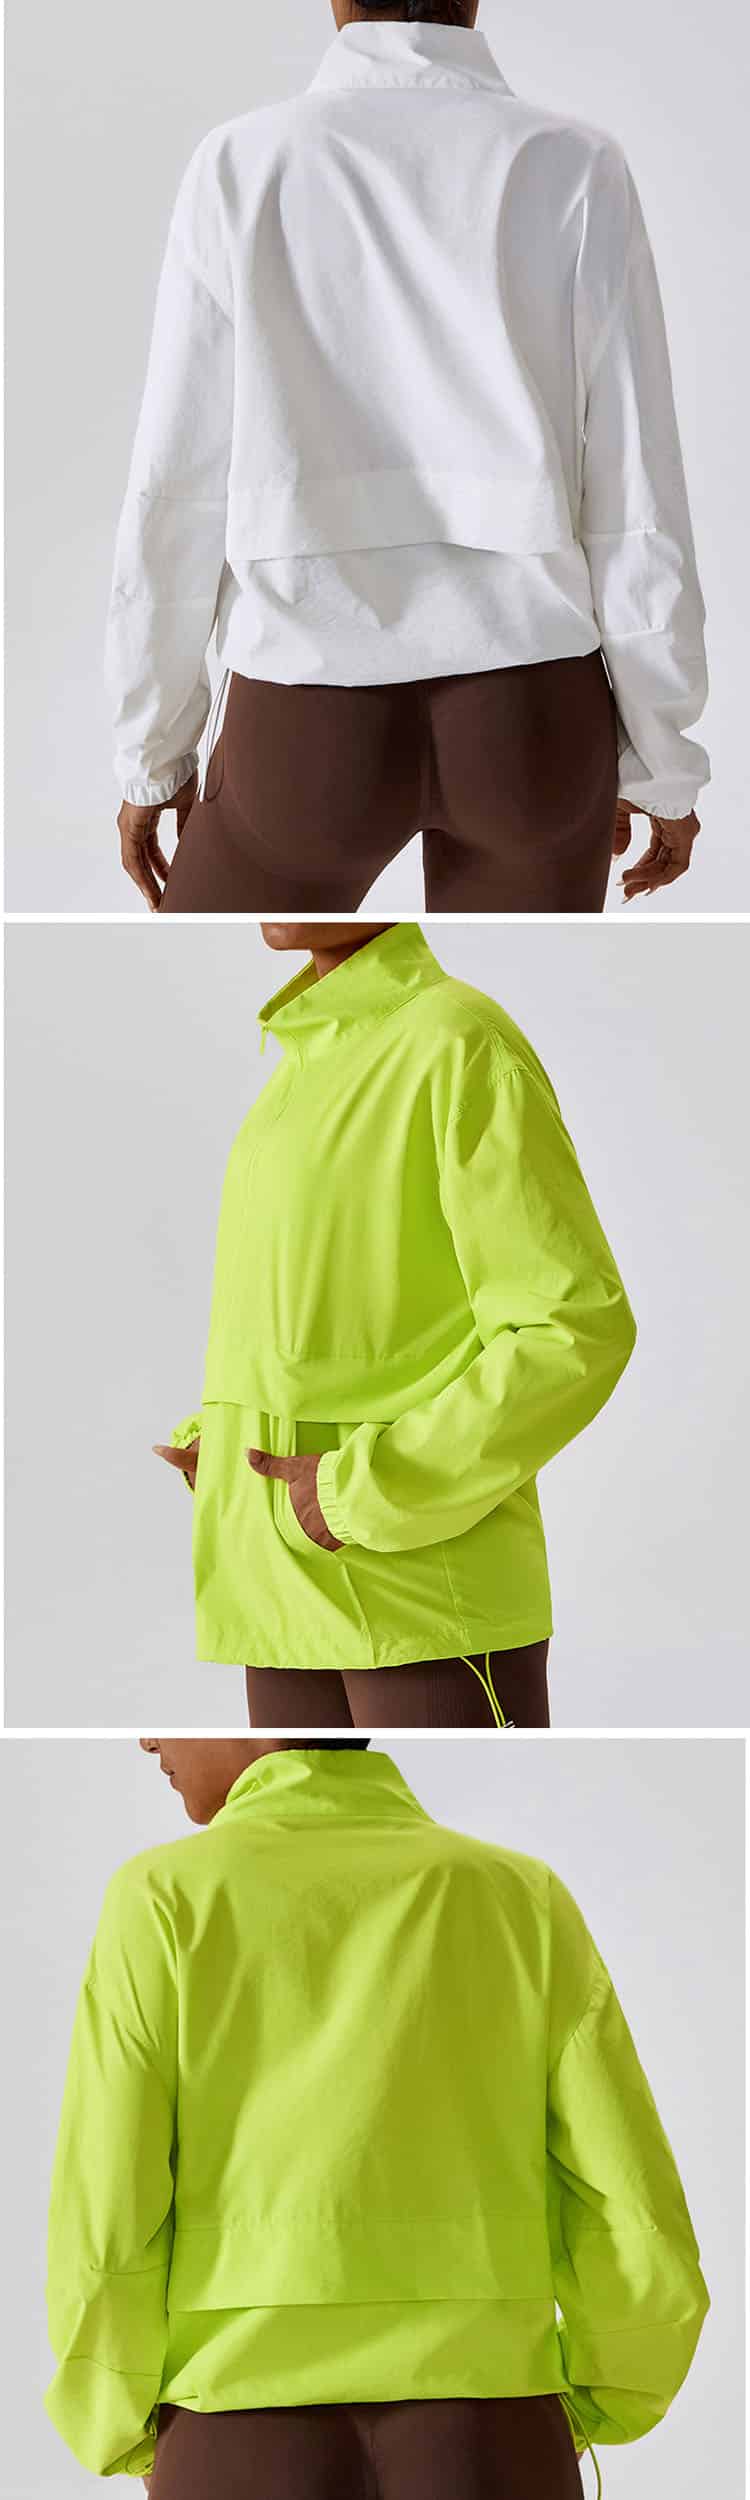 It adopts zipper design, which is windproof and warm, and it is correct for sports and life